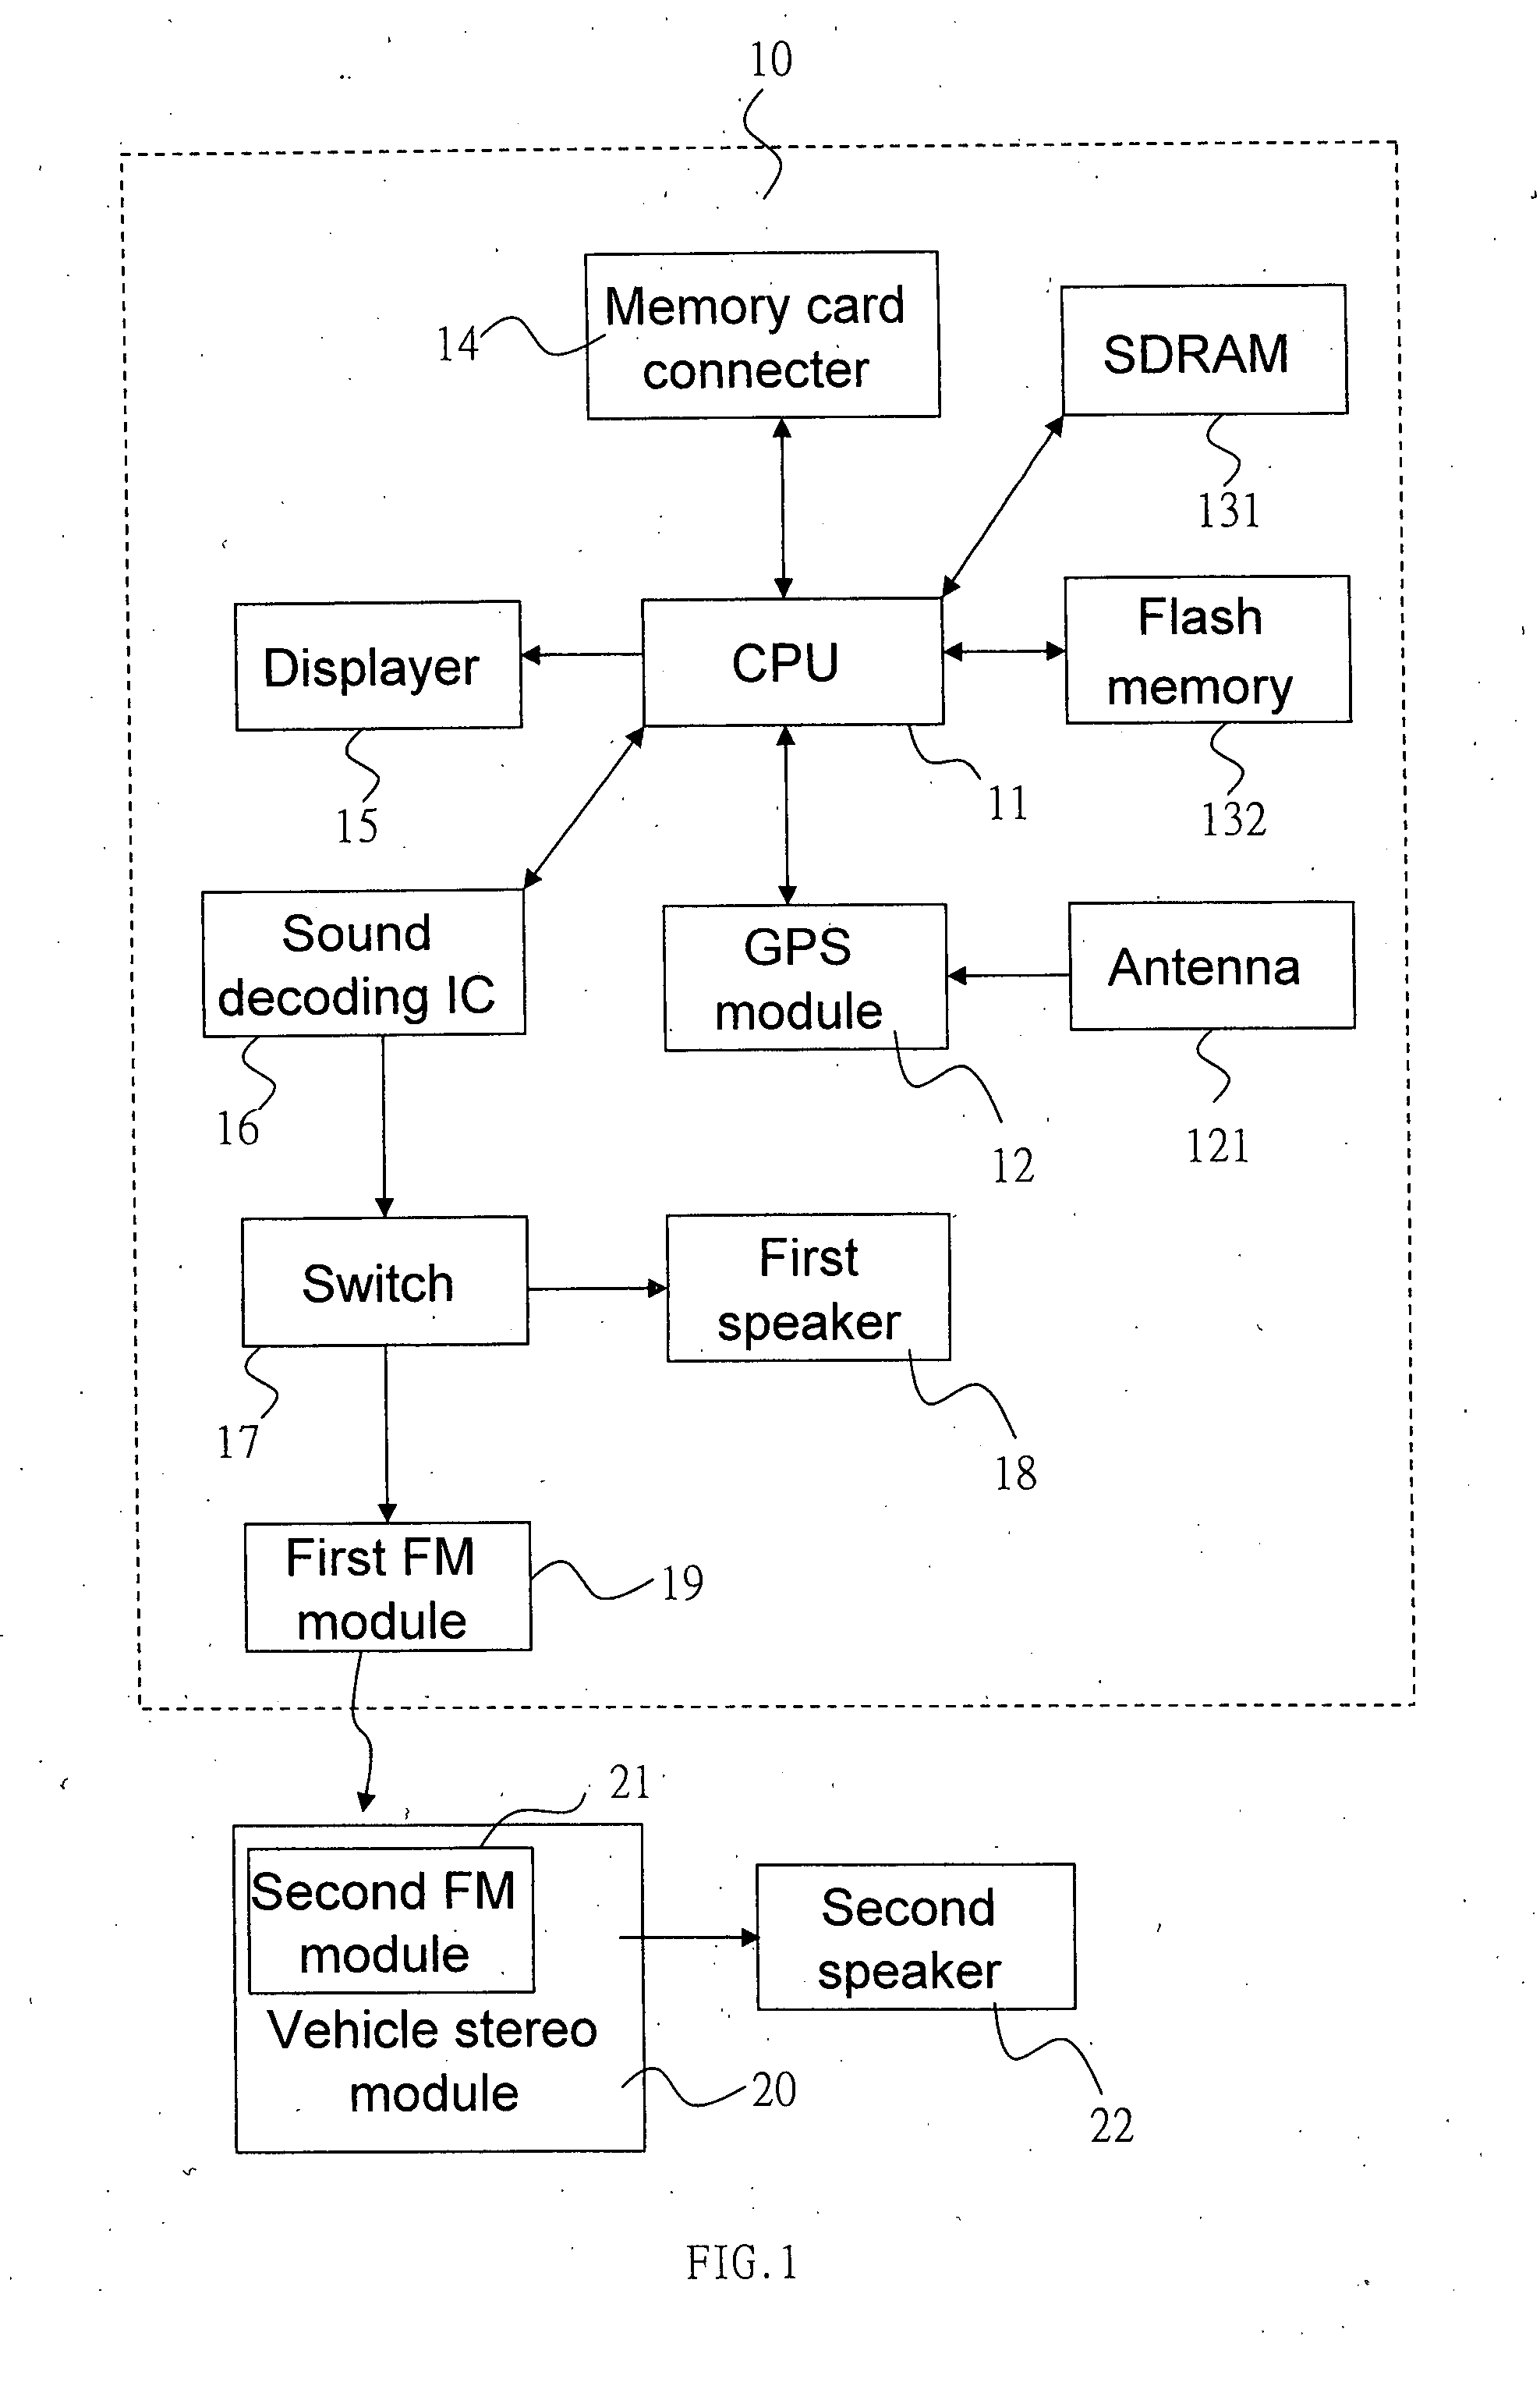 Apparatus and method for elevating sound quality and sound volume of GPS product by means of vehicle stereo